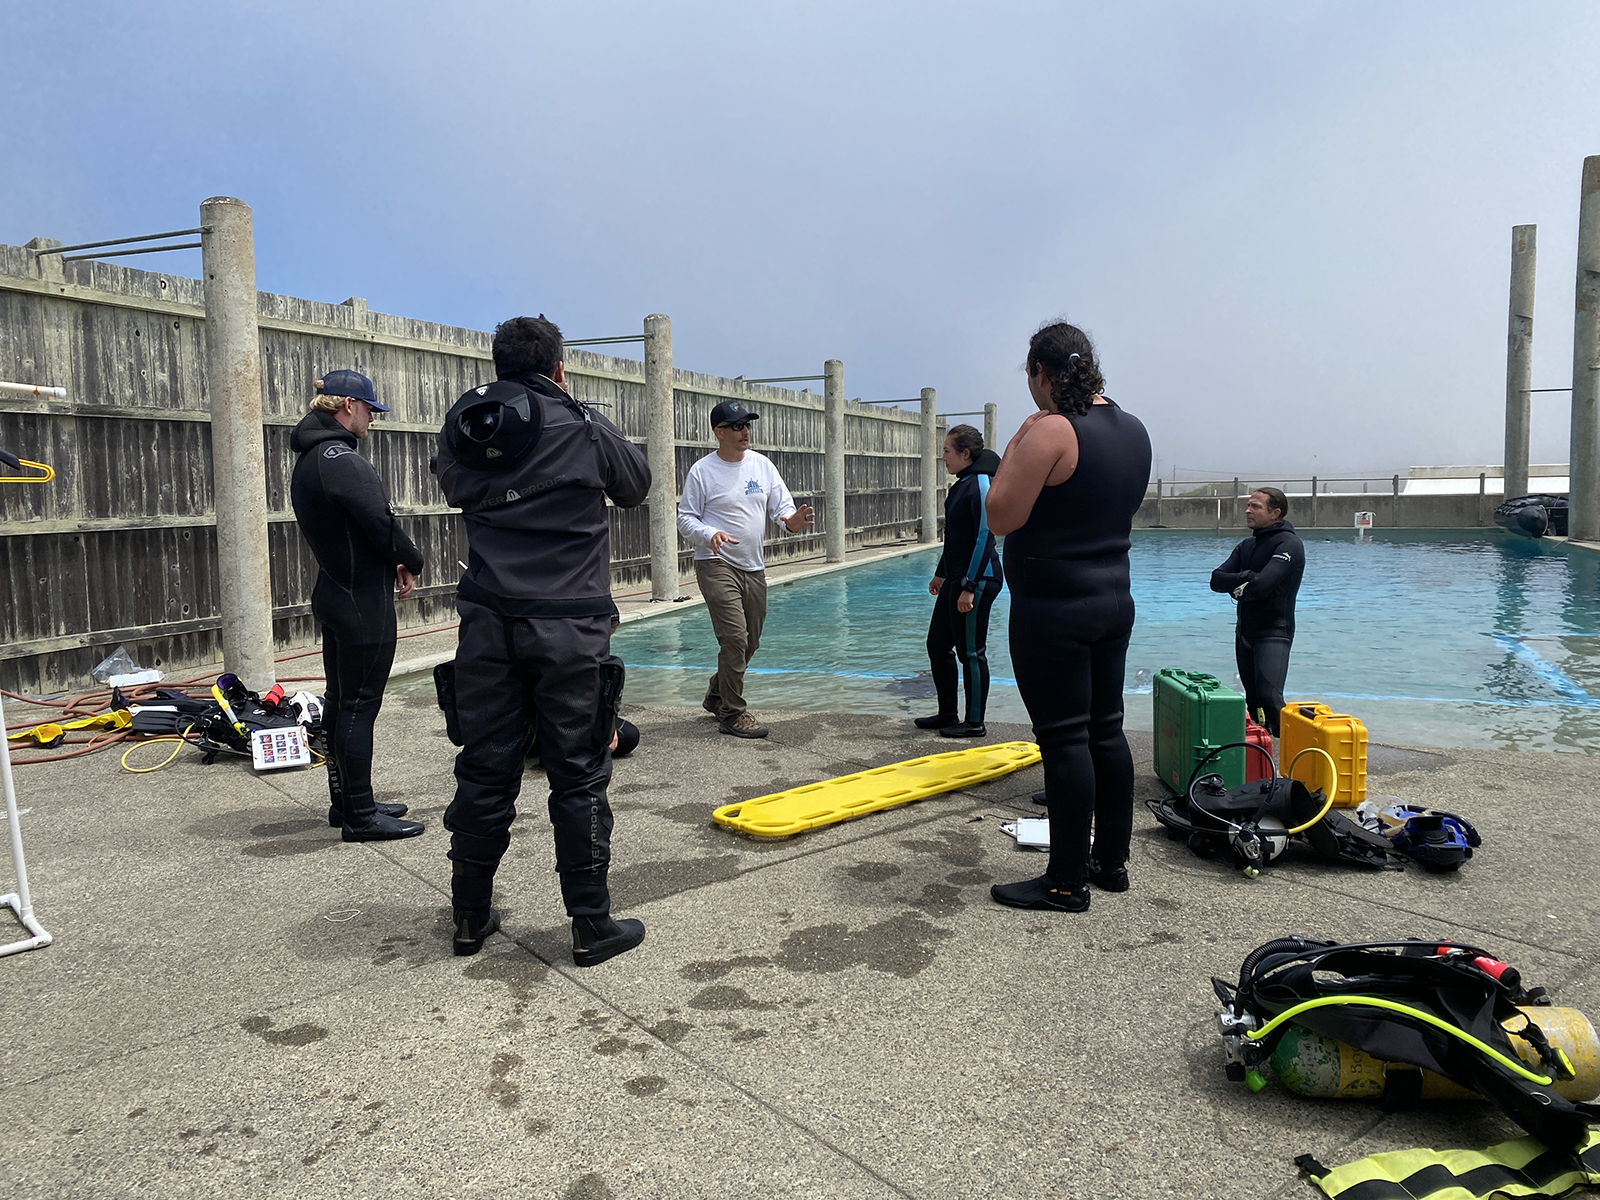 A group of people gathered around a training pool, listening to an instructor.